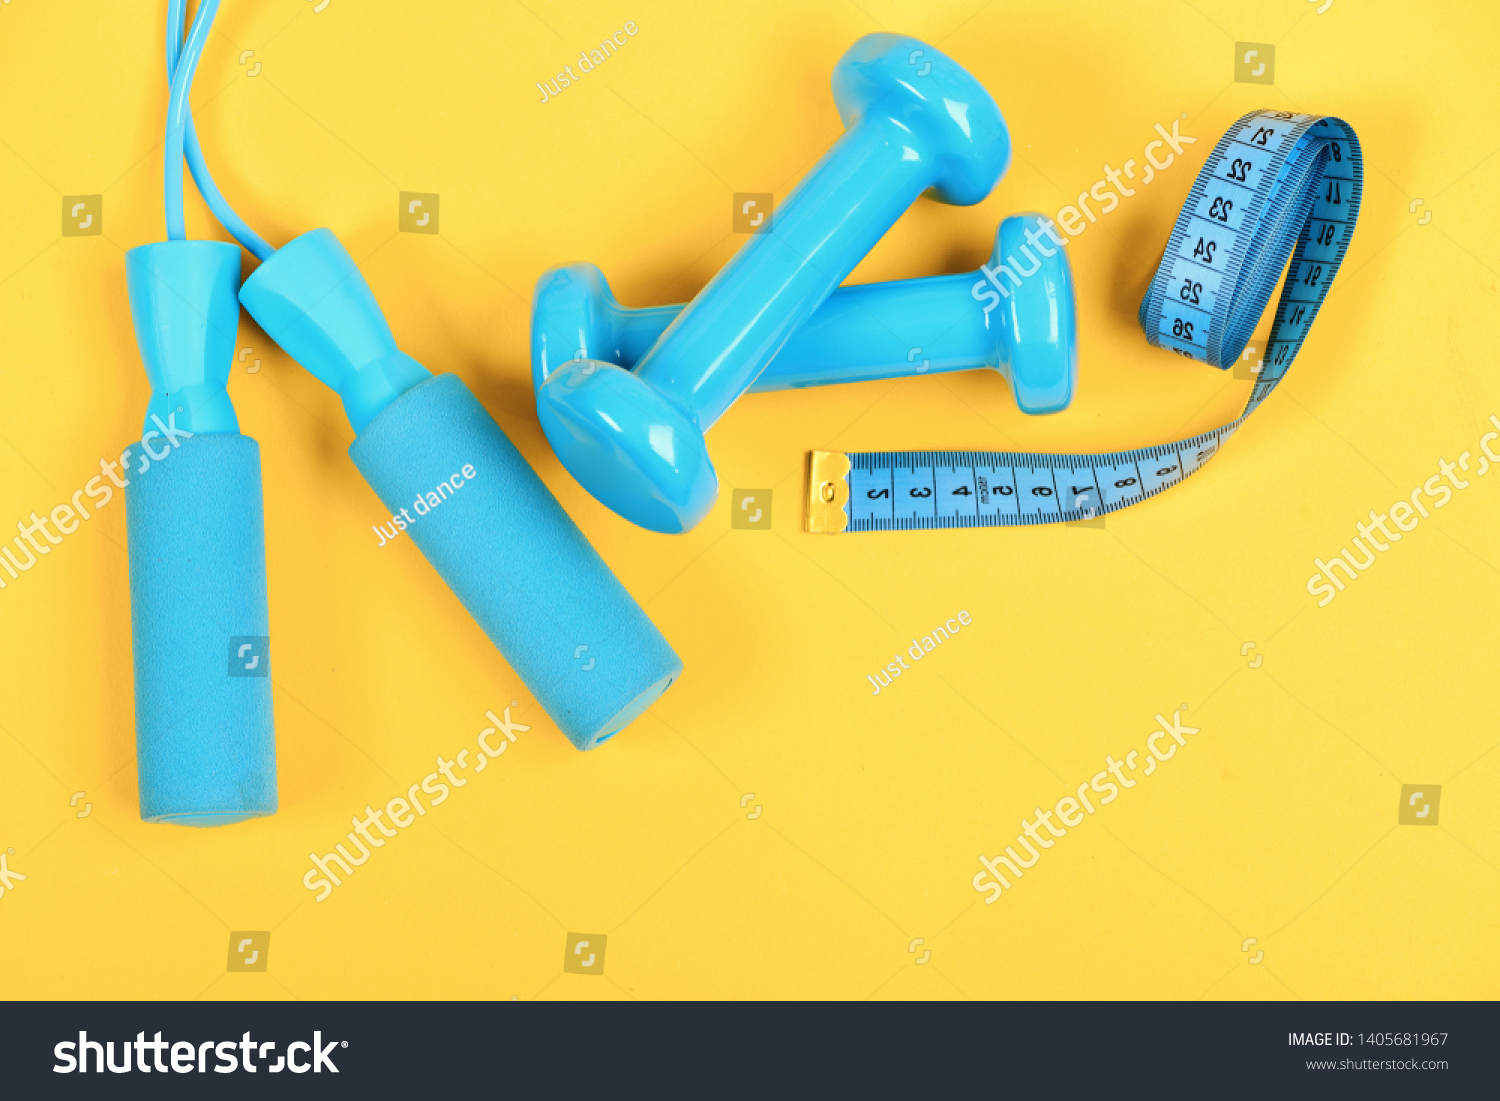 Healthy shape and sport concept. Dumbbells and jump rope in cyan color isolated on yellow background. Shaping and fitness equipment. Barbells and skipping rope next to measure tape roll, top view #1405681967